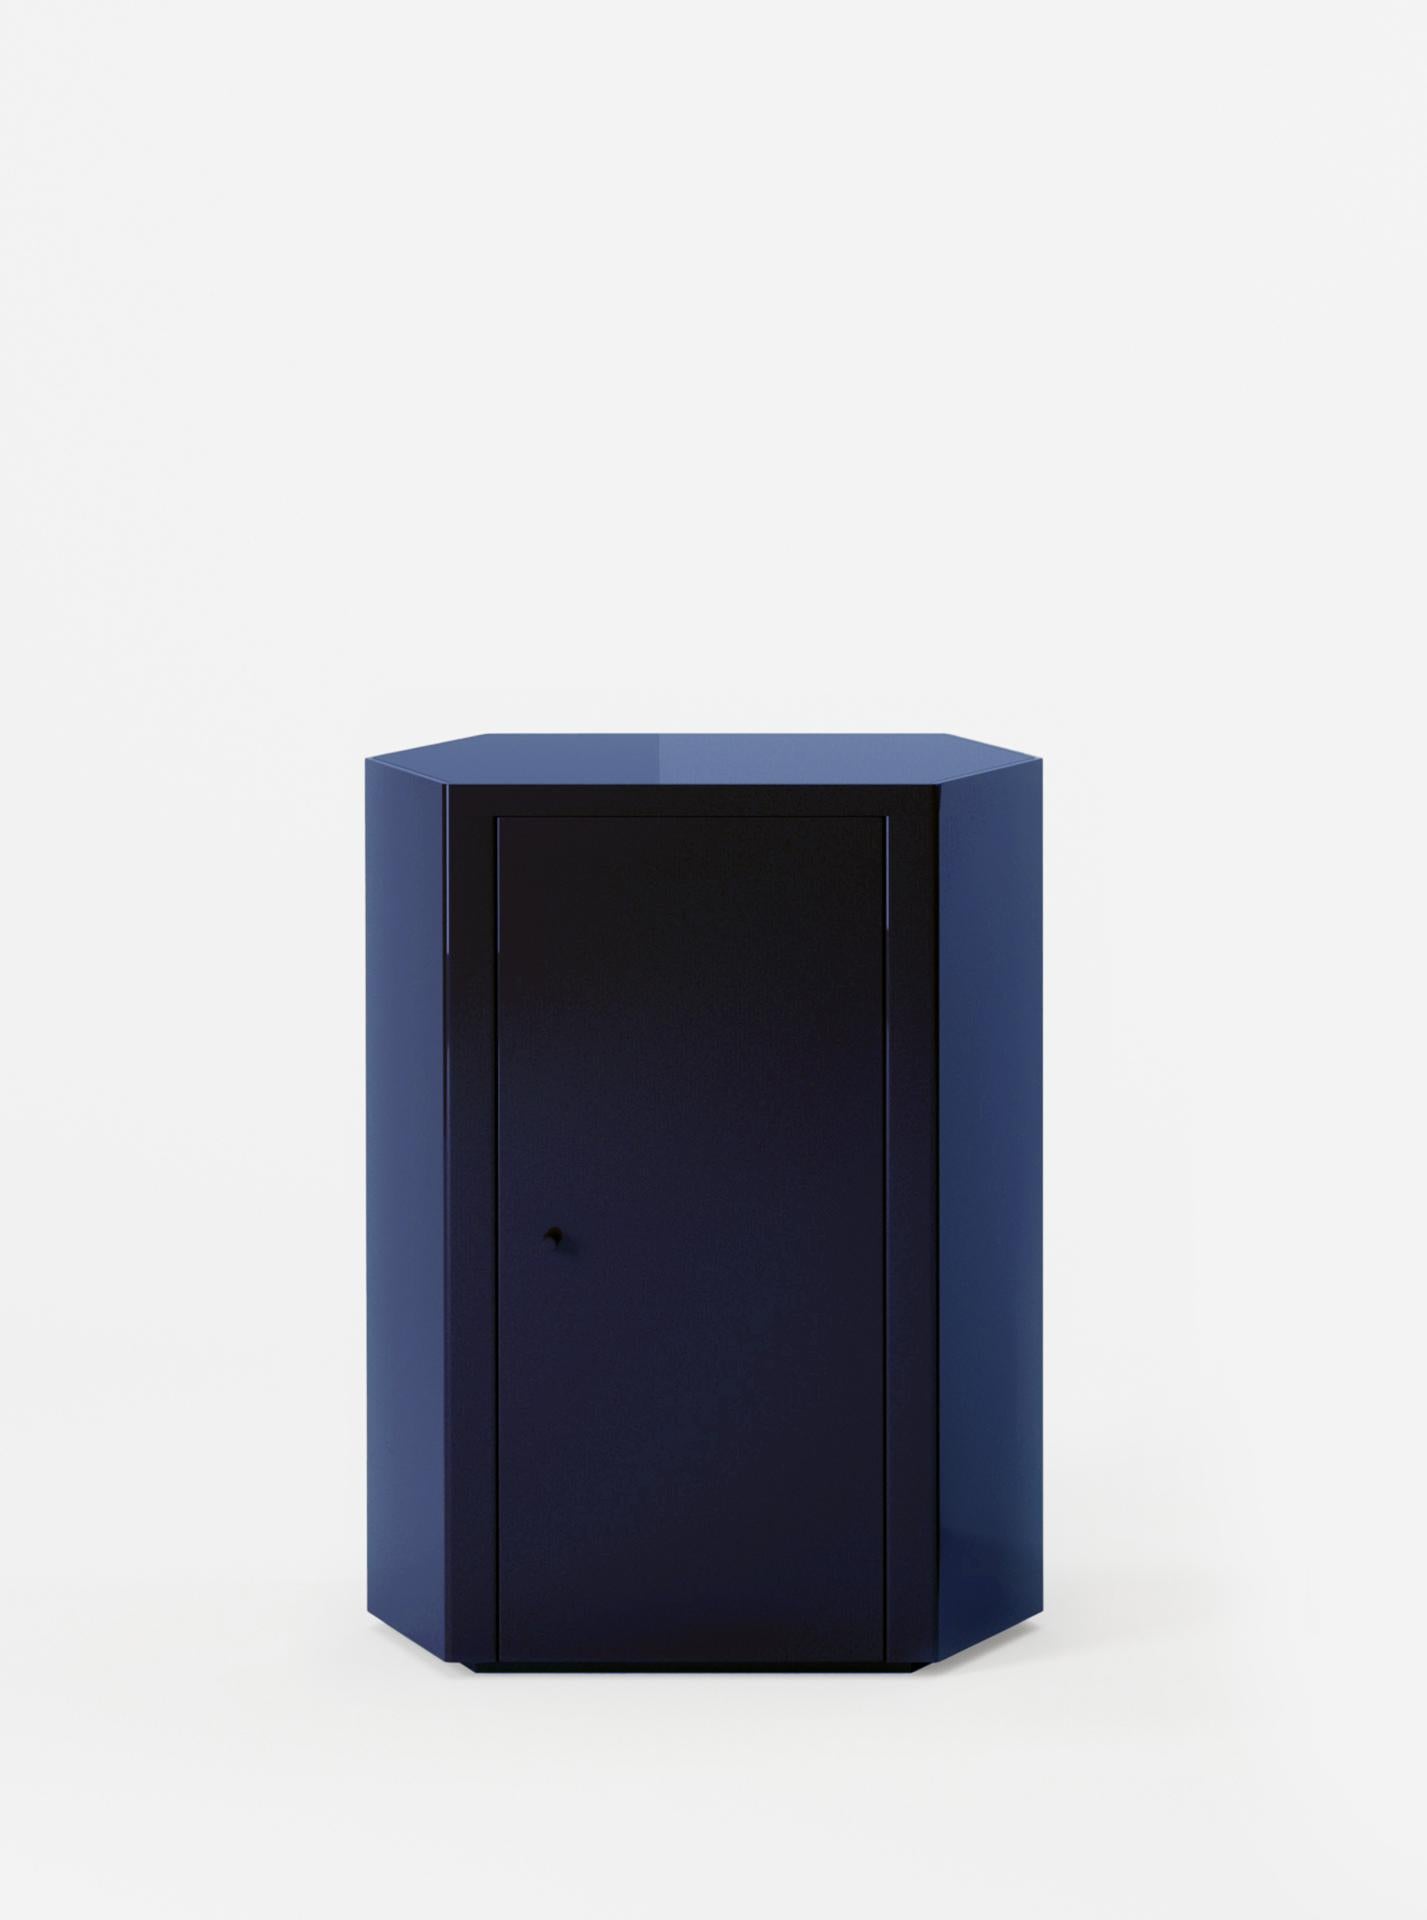 Minimalist Pair of Park Night Stands in Midnight Navy Lacquer by Yaniv Chen for Lemon For Sale